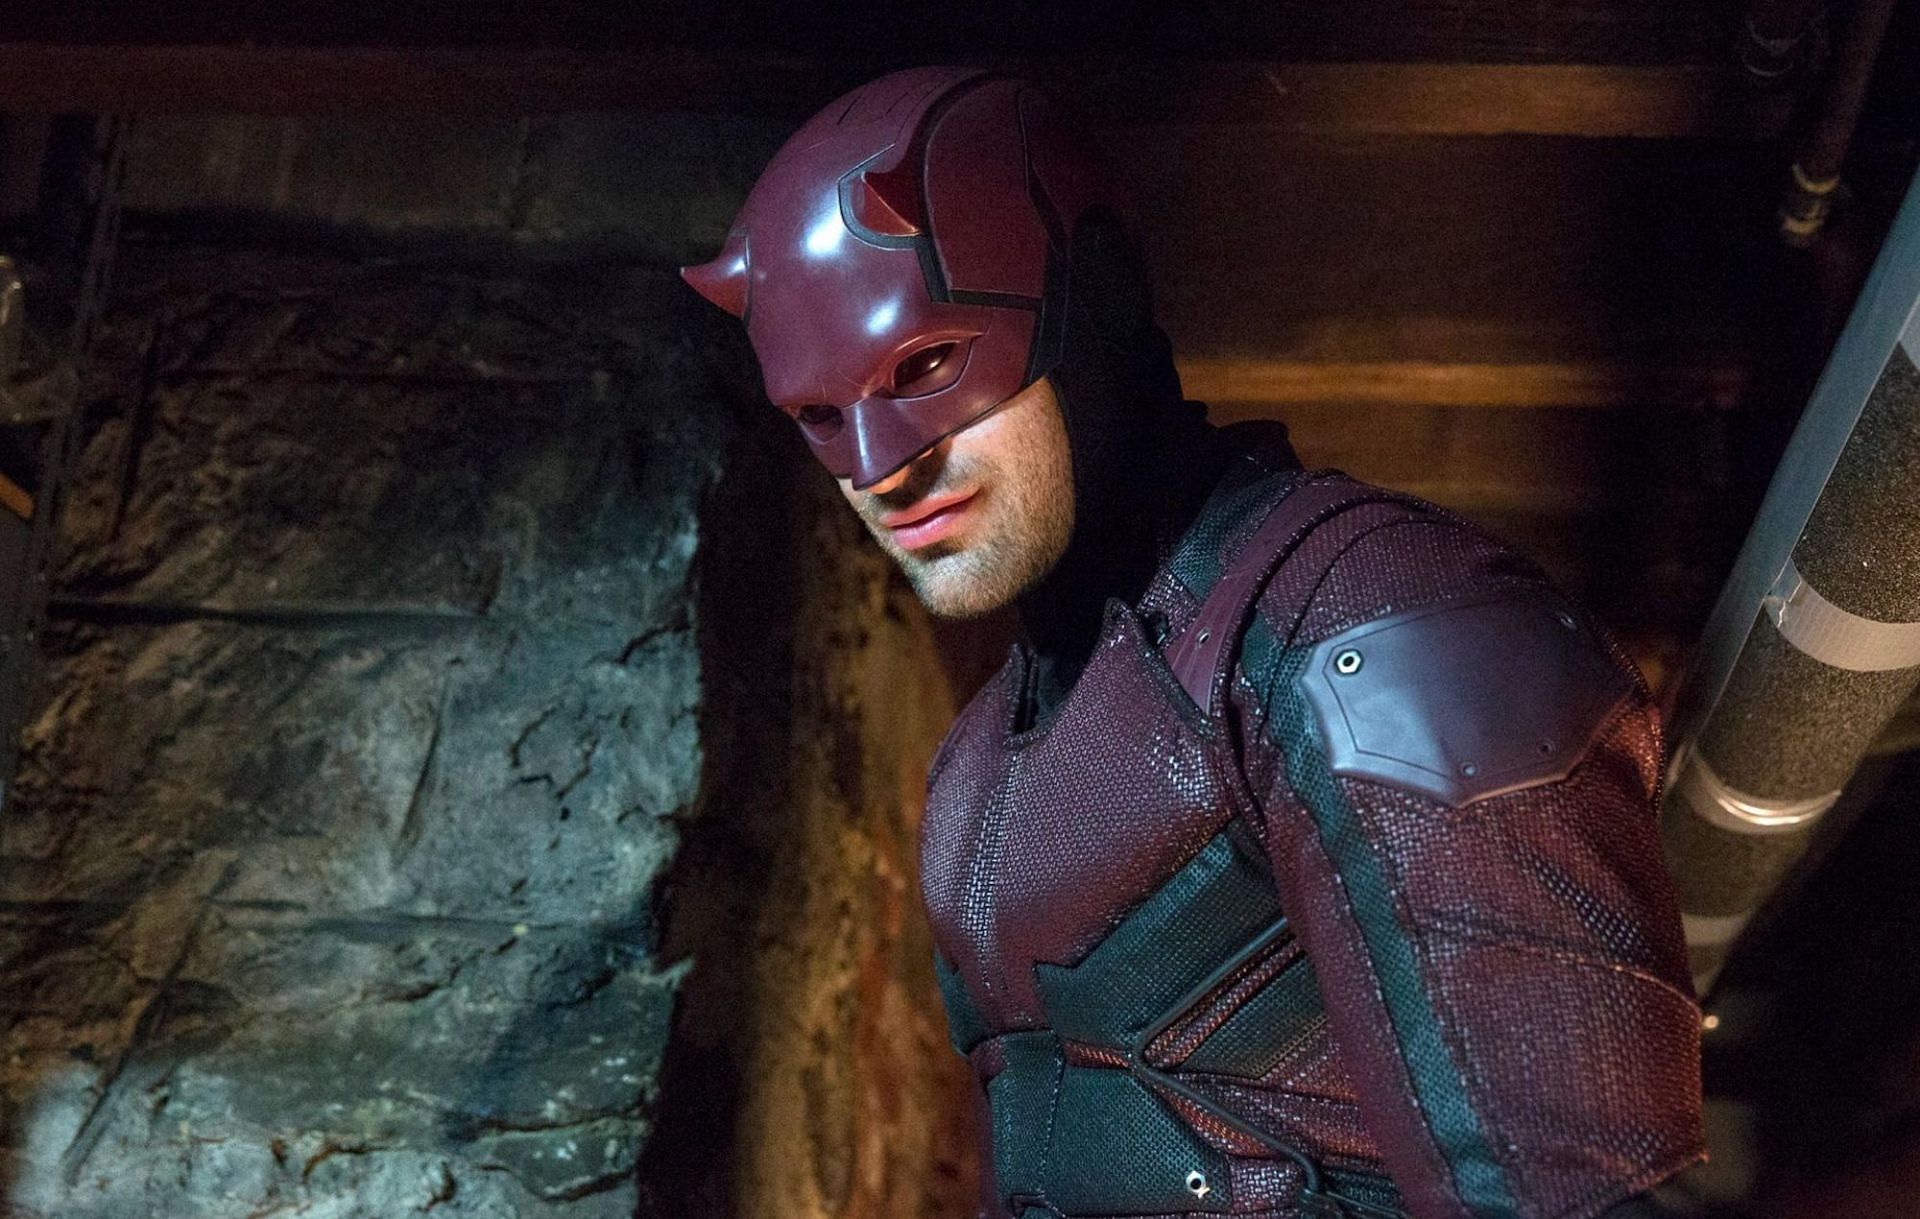 Ben Affleck To Join Another Multiverse As 'Daredevil' In Deadpool 3 After  The Flash? Netizens Say He Just Plays Versions Of His Old Characters